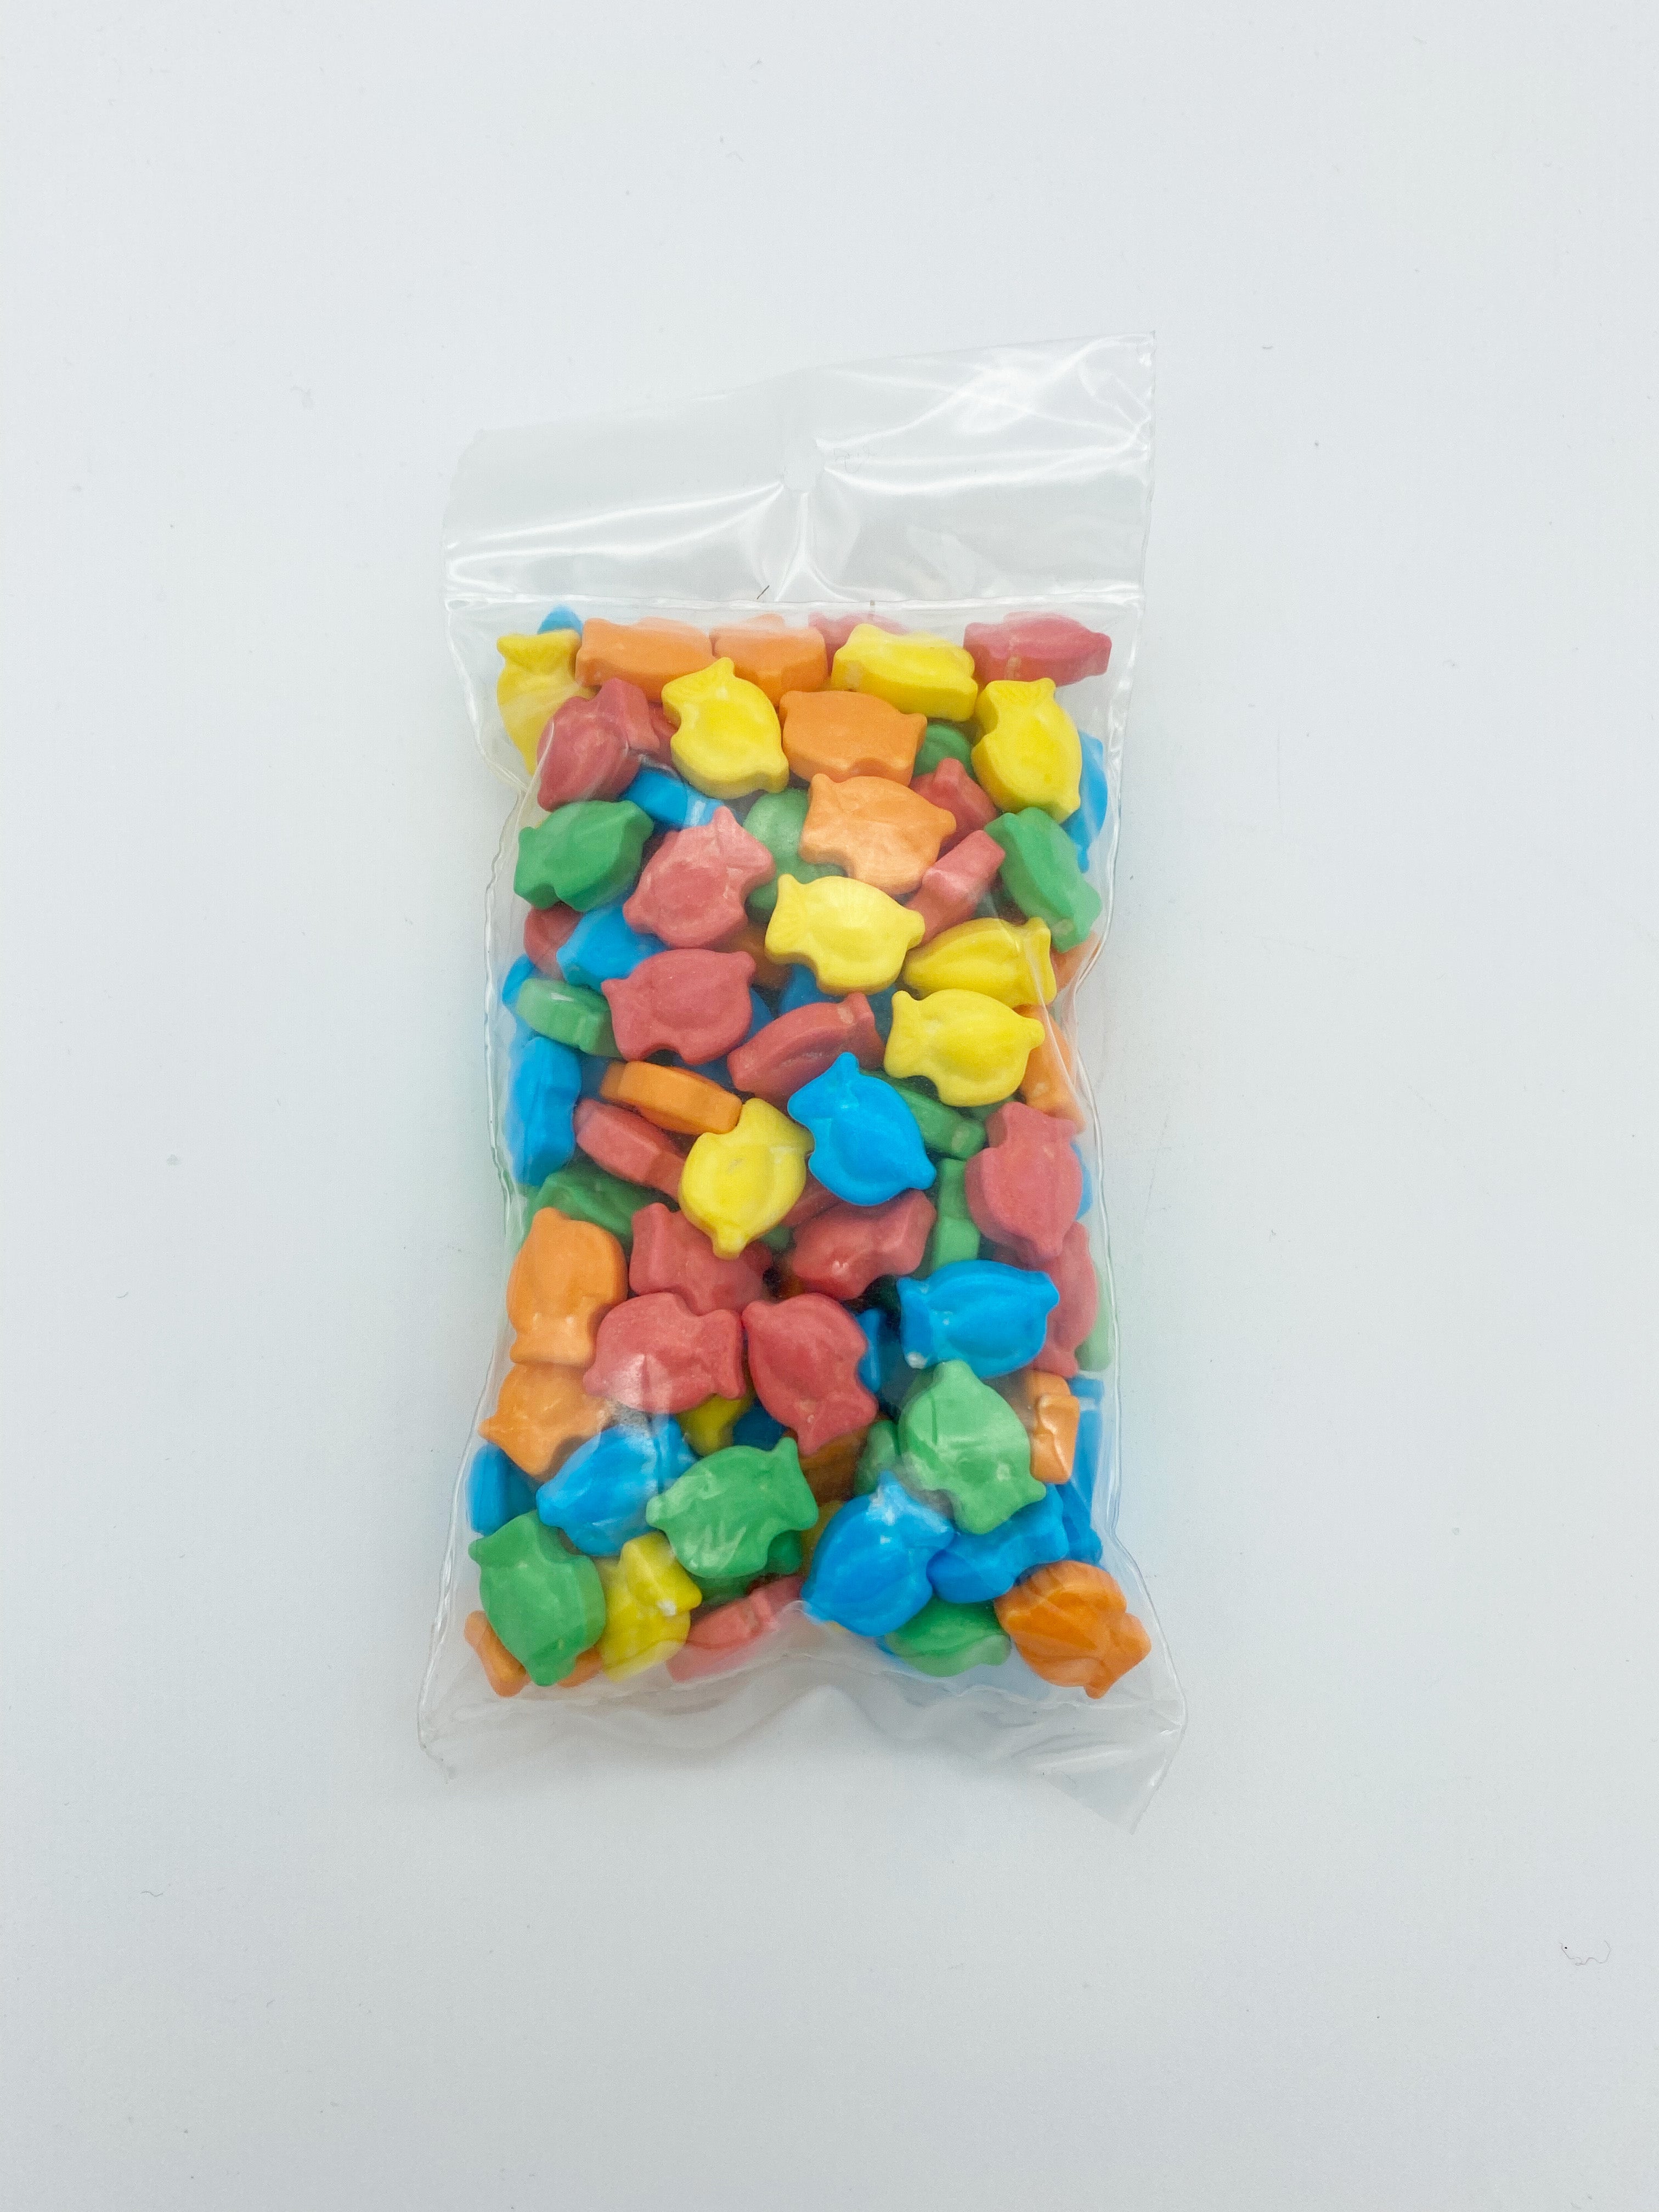 GONE FISHING PRESSED CANDY – The Penny Candy Store